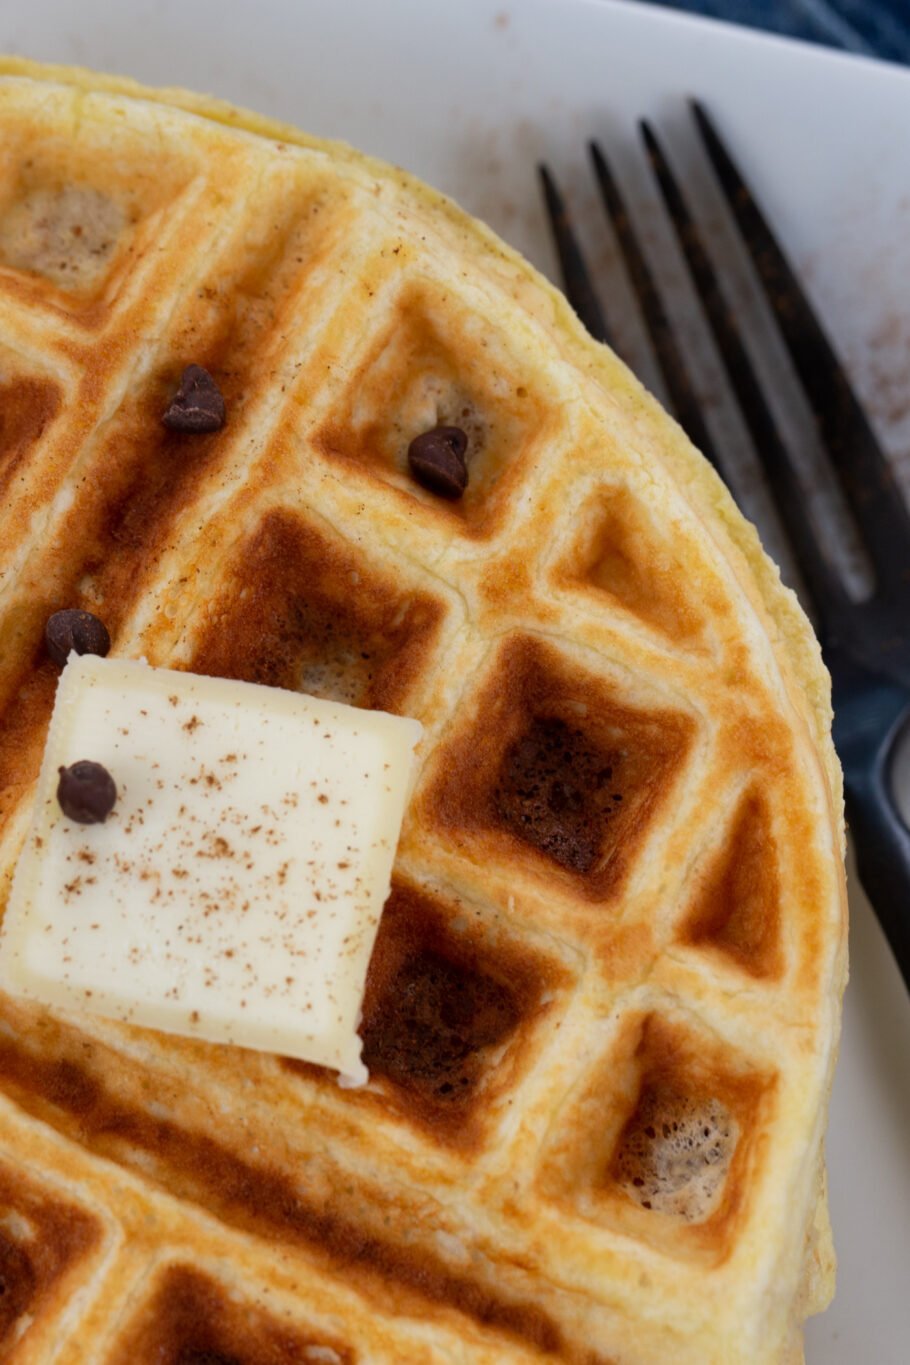 https://media.theproteinchef.co/wp-content/uploads/2022/04/Easy-Protein-Waffles-with-Butter-910x1365.jpg